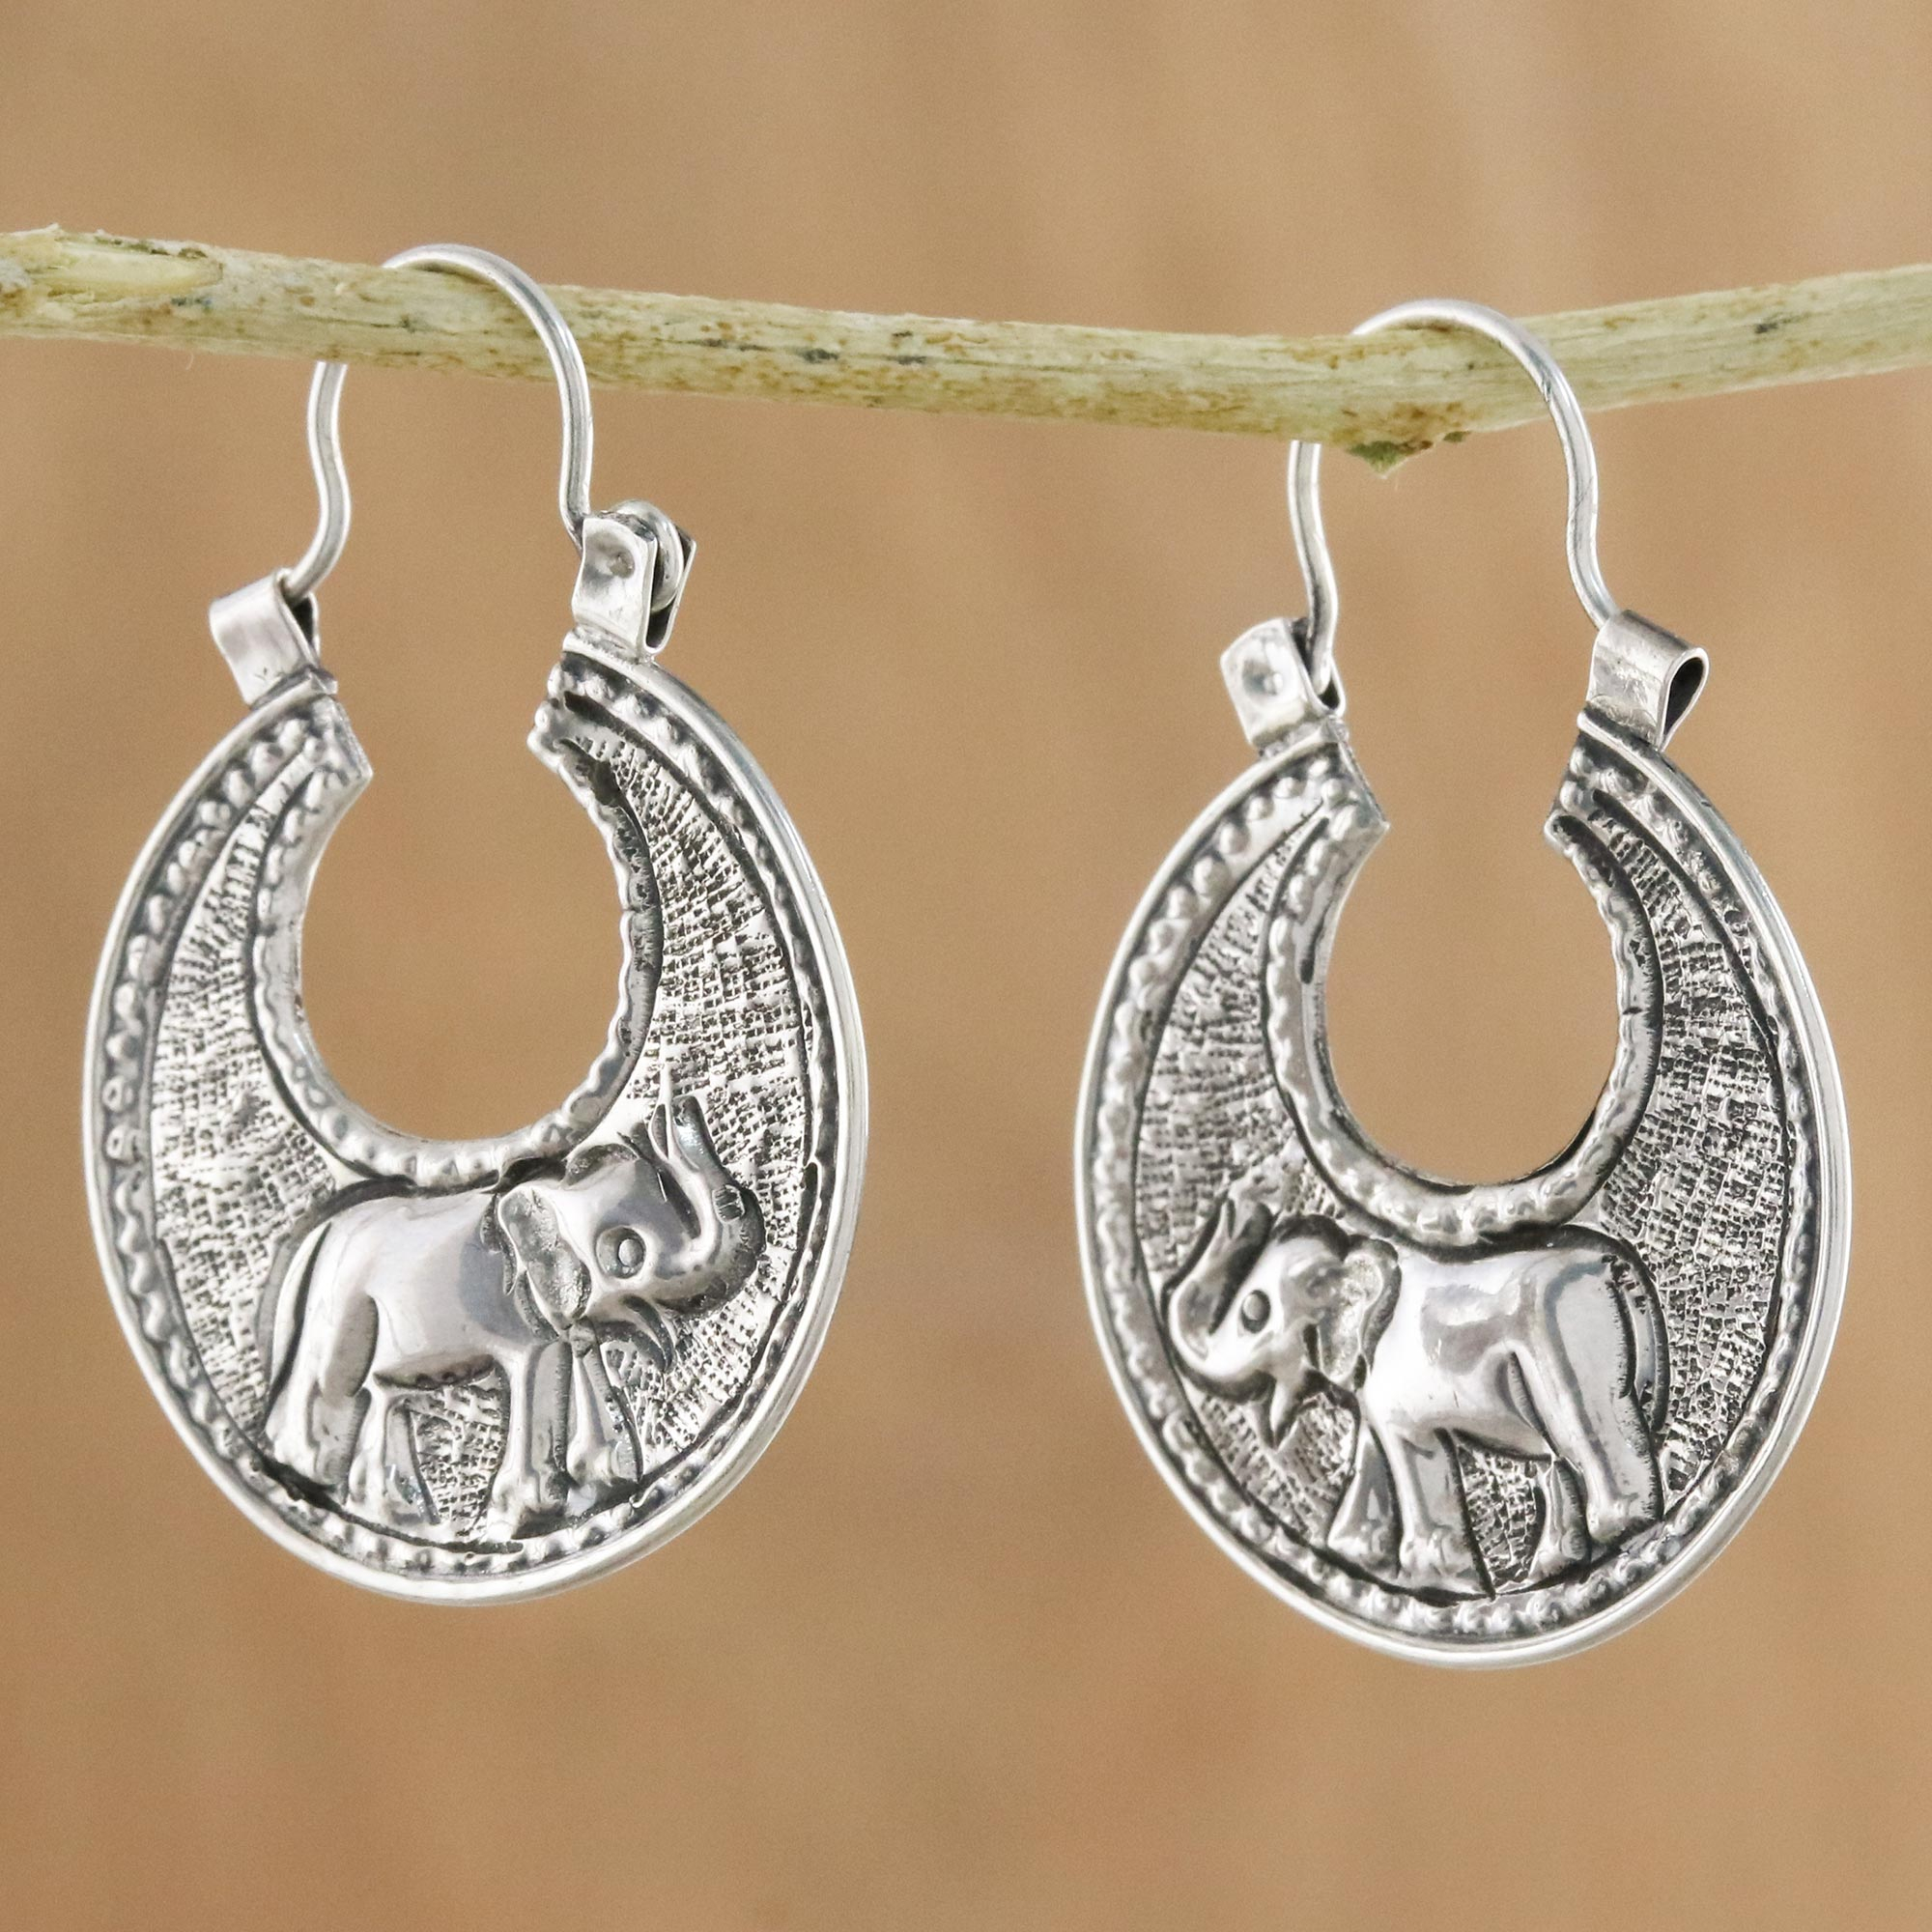 Sterling Silver Elephant Hoop Earrings from Thailand, 'Elephant Magic'